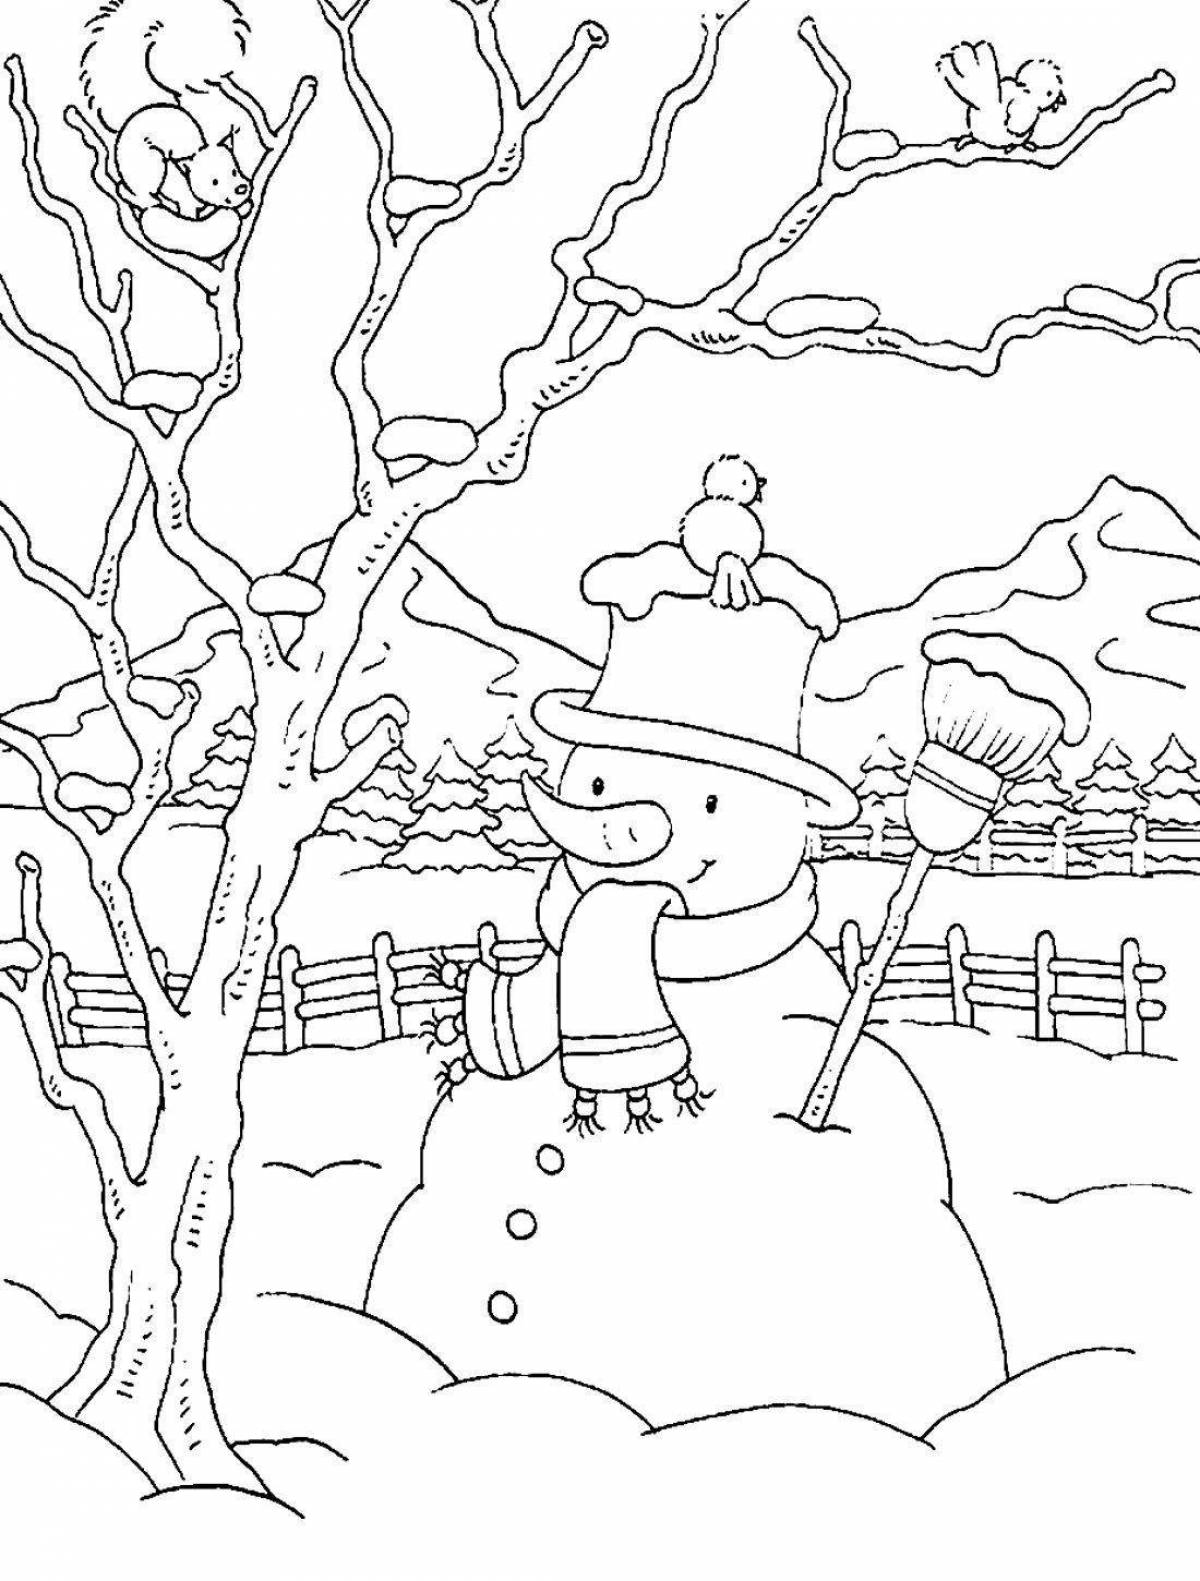 Delightful winter day coloring book